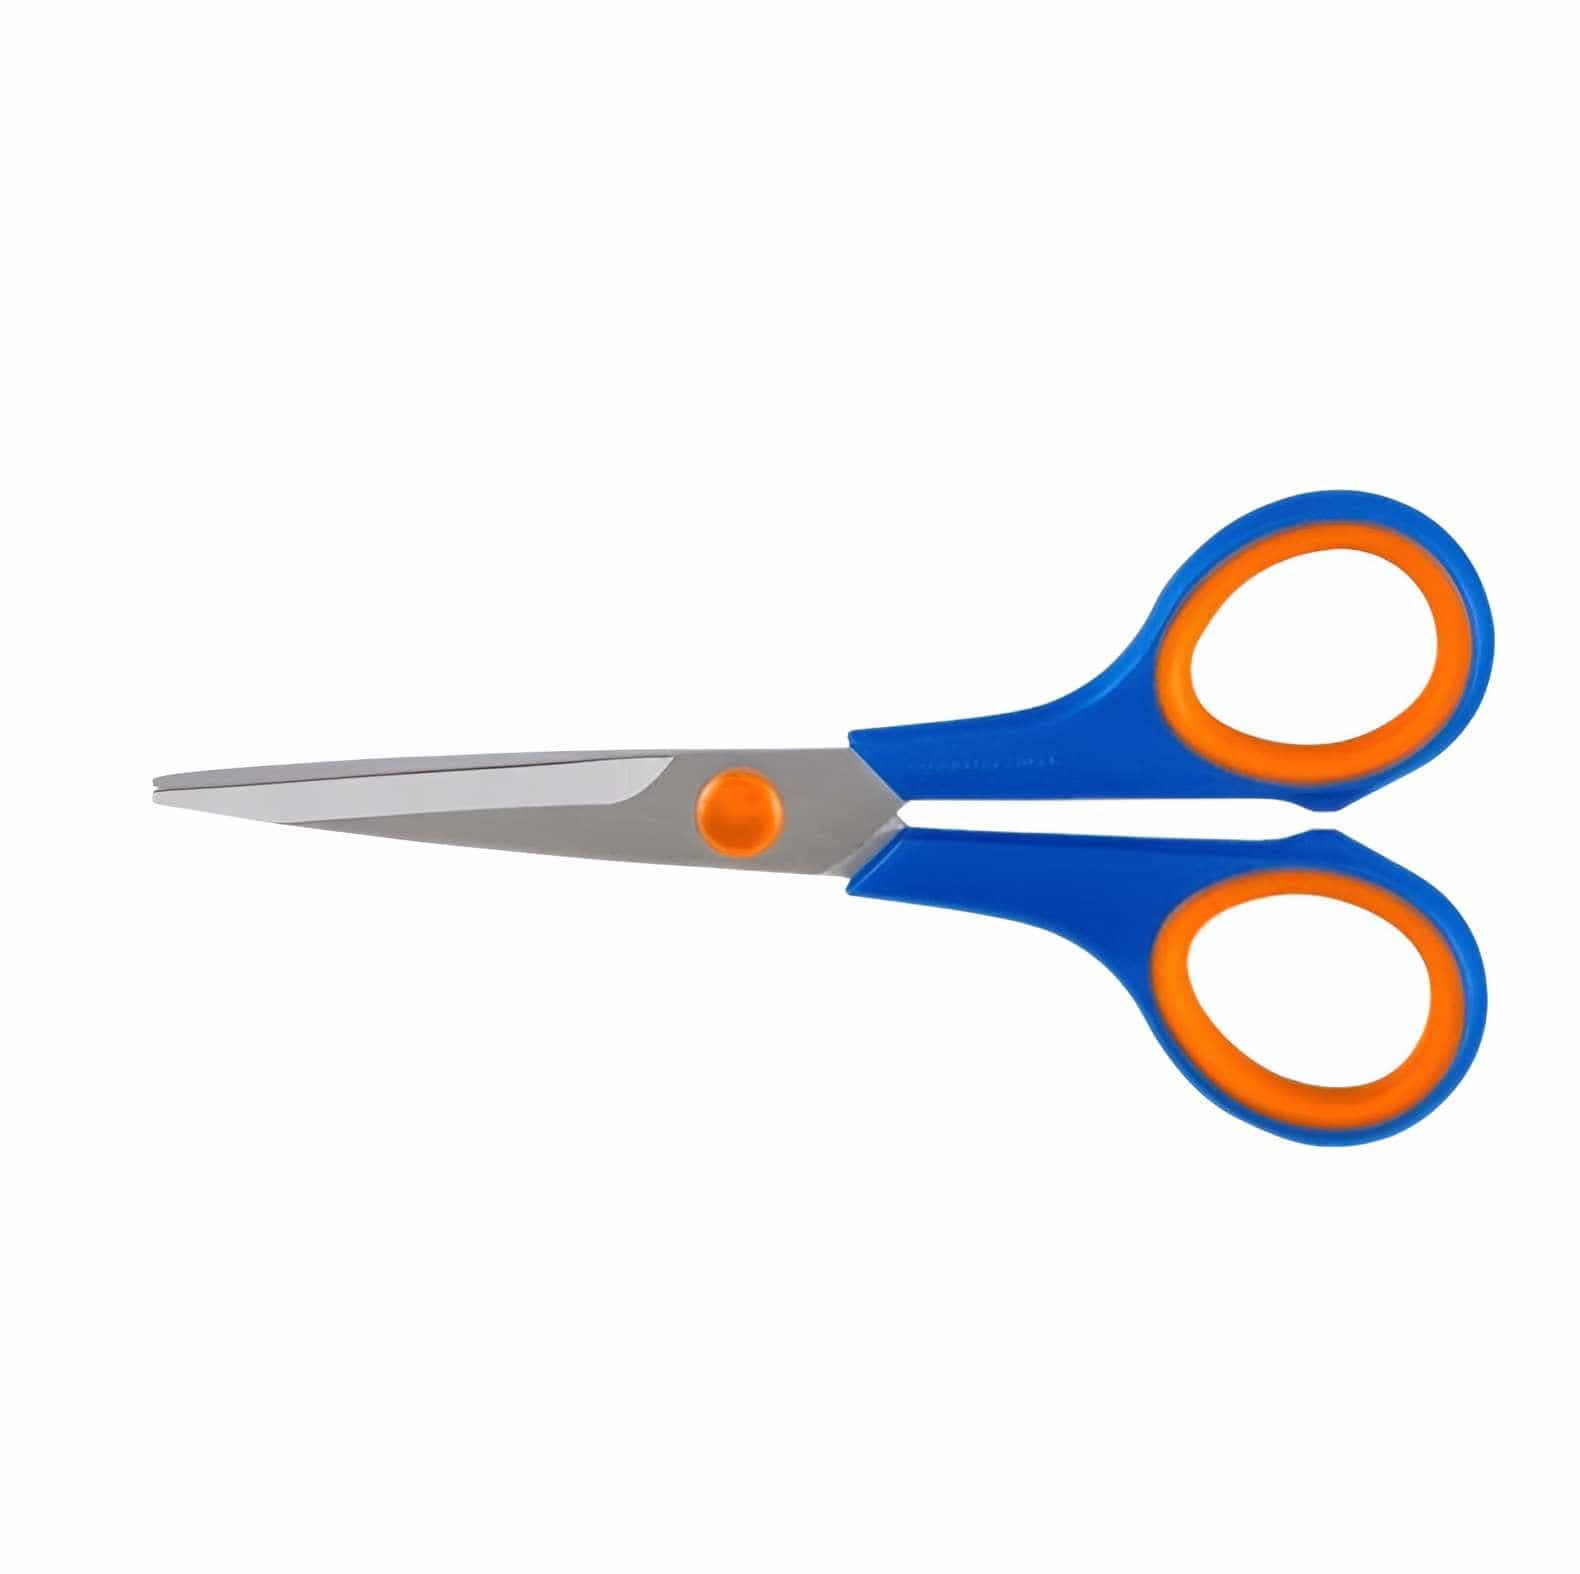 Buy Wadfow 5.5" Stainless Steel Kitchen Scissors - WSX2655 in Accra, Ghana | Supply Master Hand Saws & Cutting Tools Buy Tools hardware Building materials